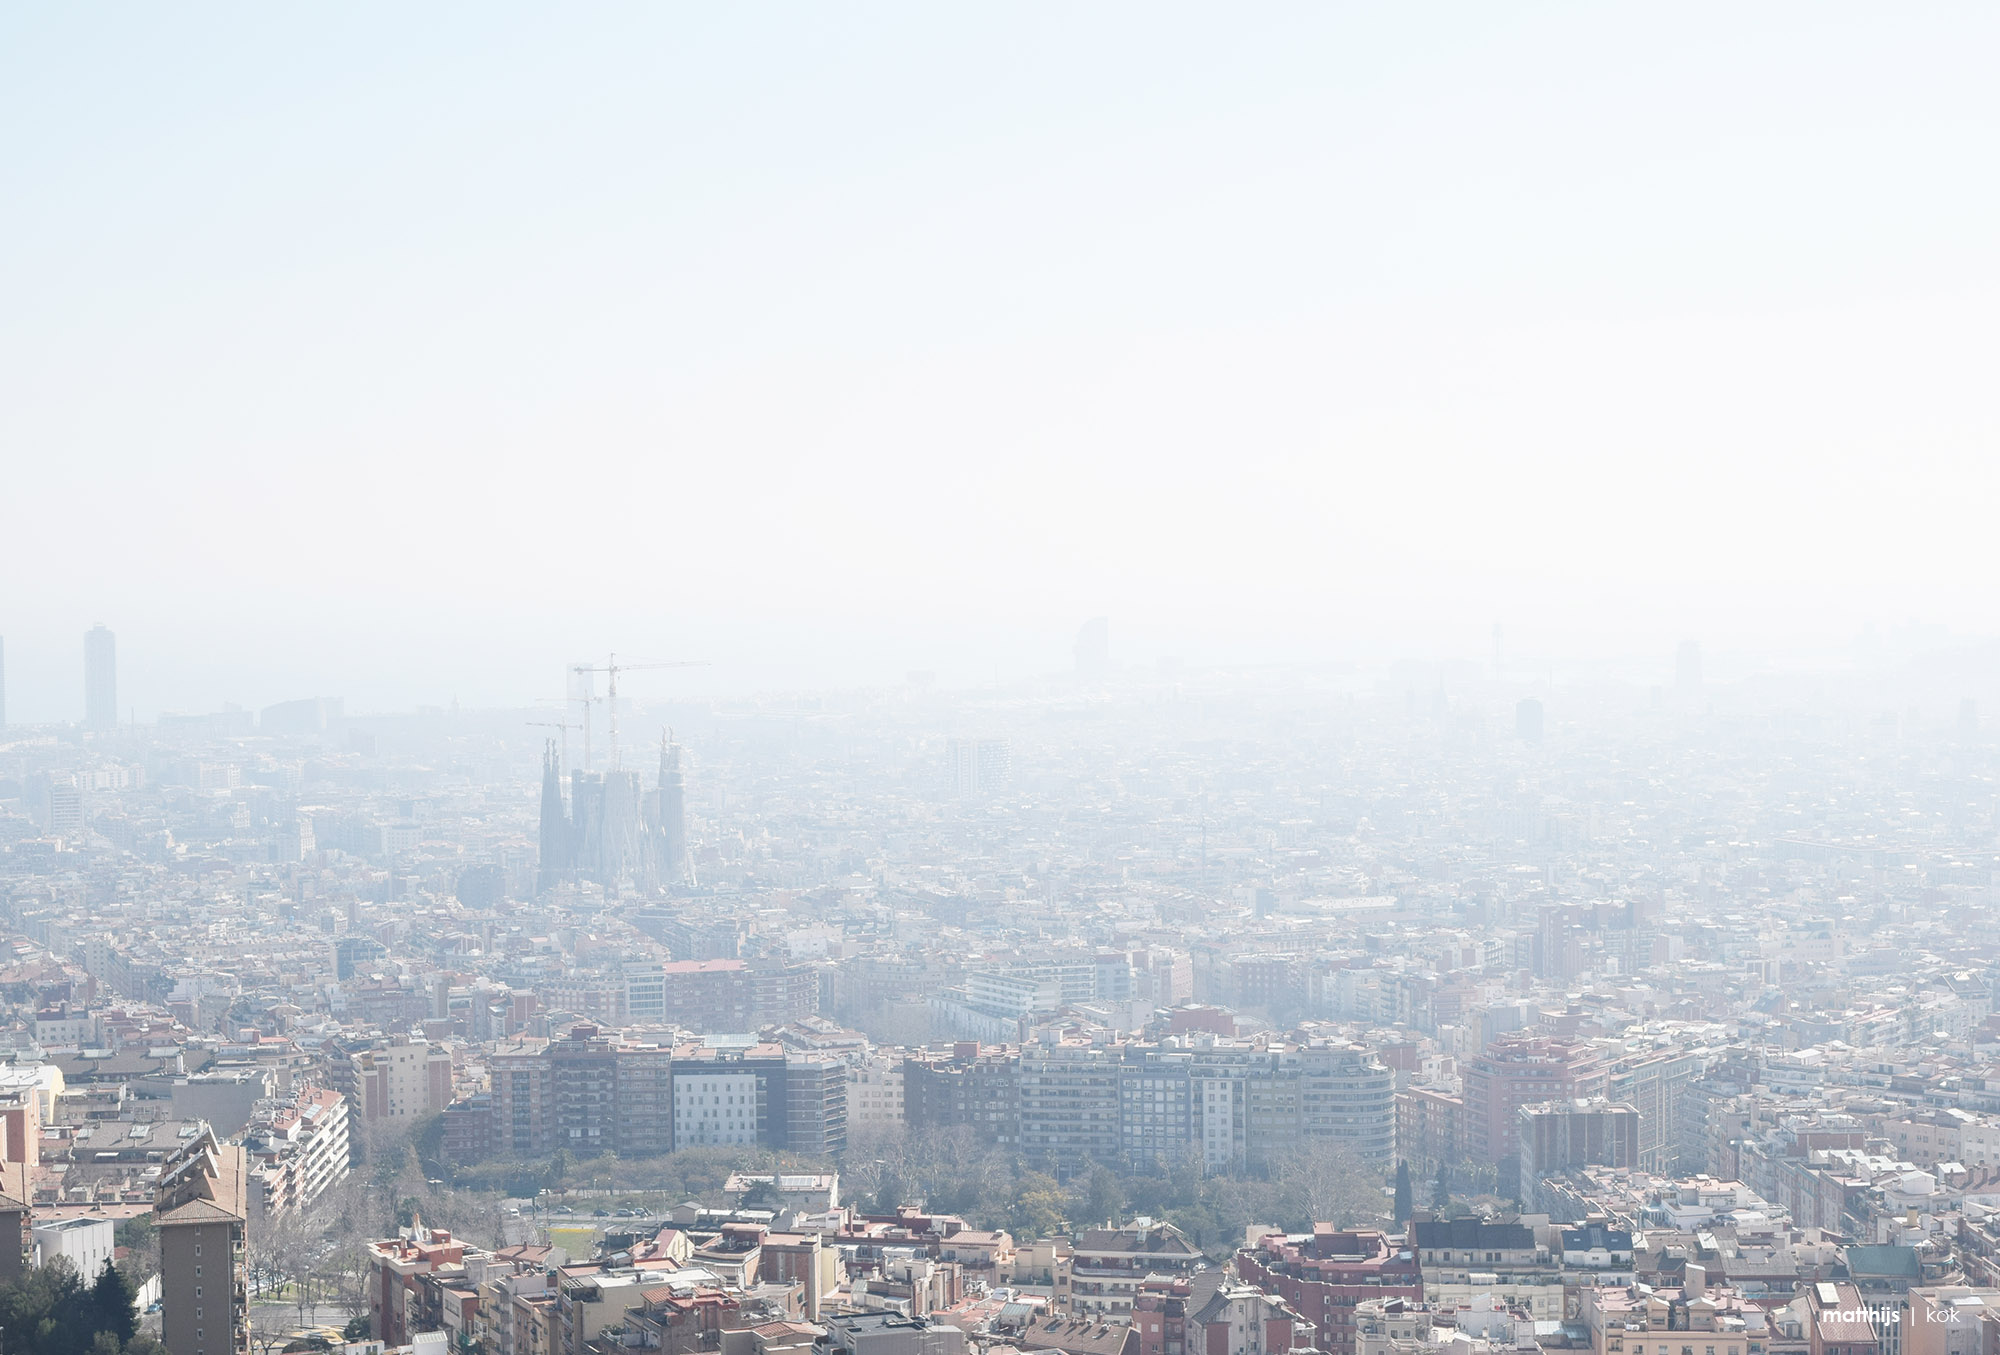 View of Barcelona from Bunkers del Carmel | Photo by Matthijs Kok